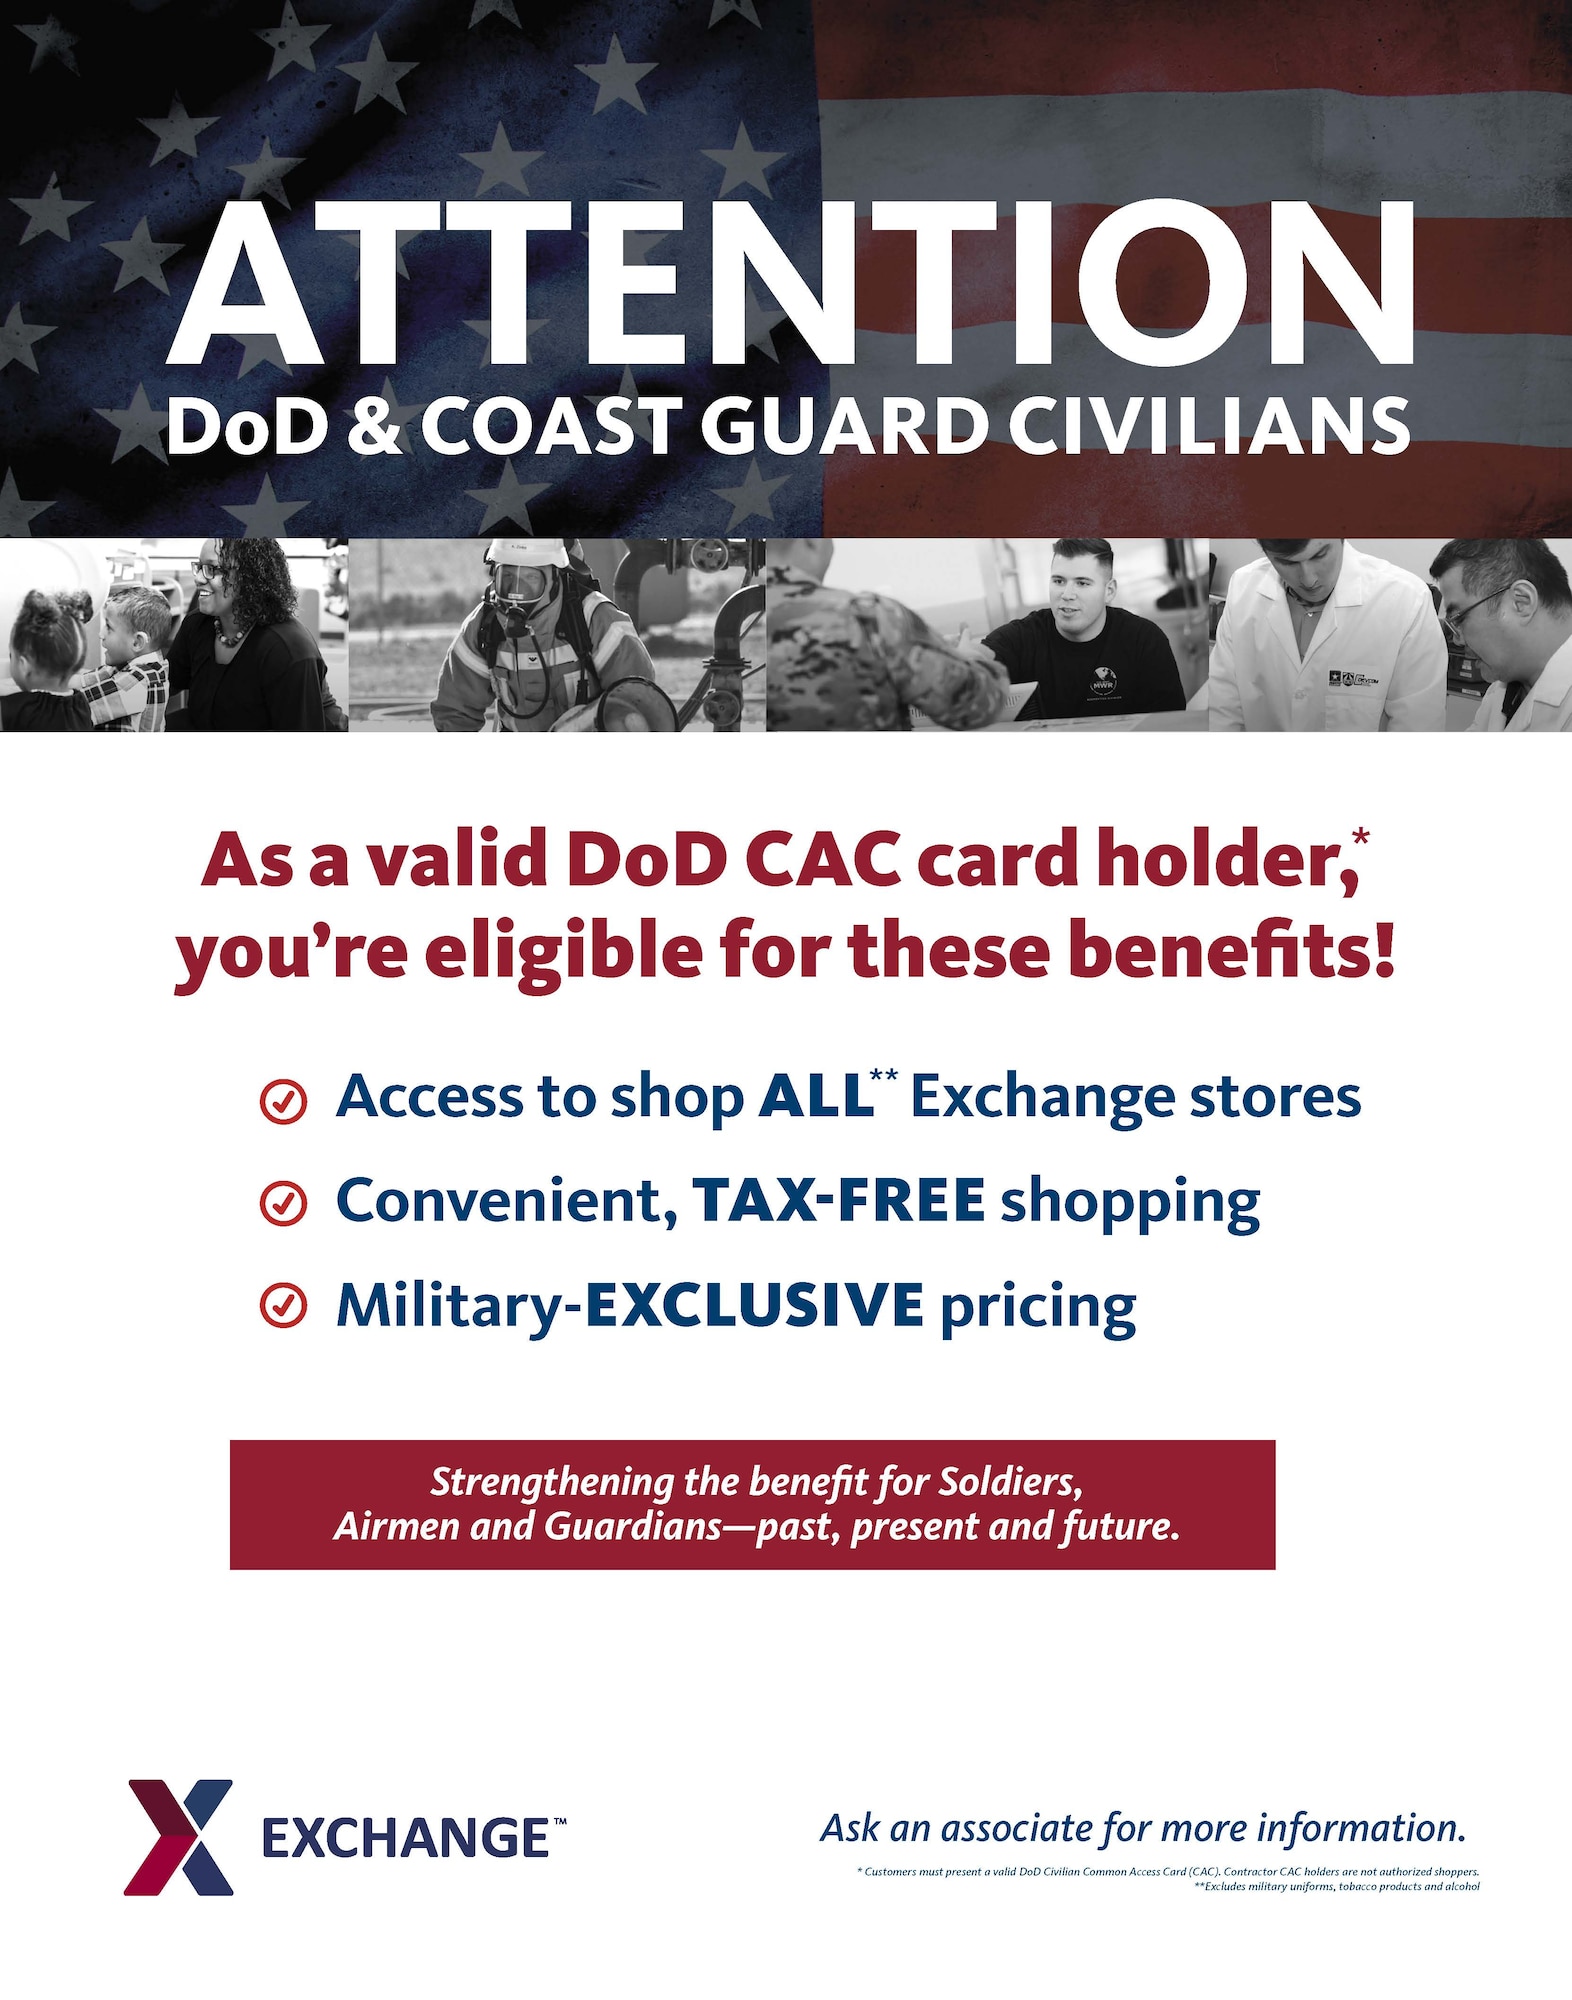 Illustration stating that Department of Defense and Coast Guard Civilians are welcome to shop at the Exchange.